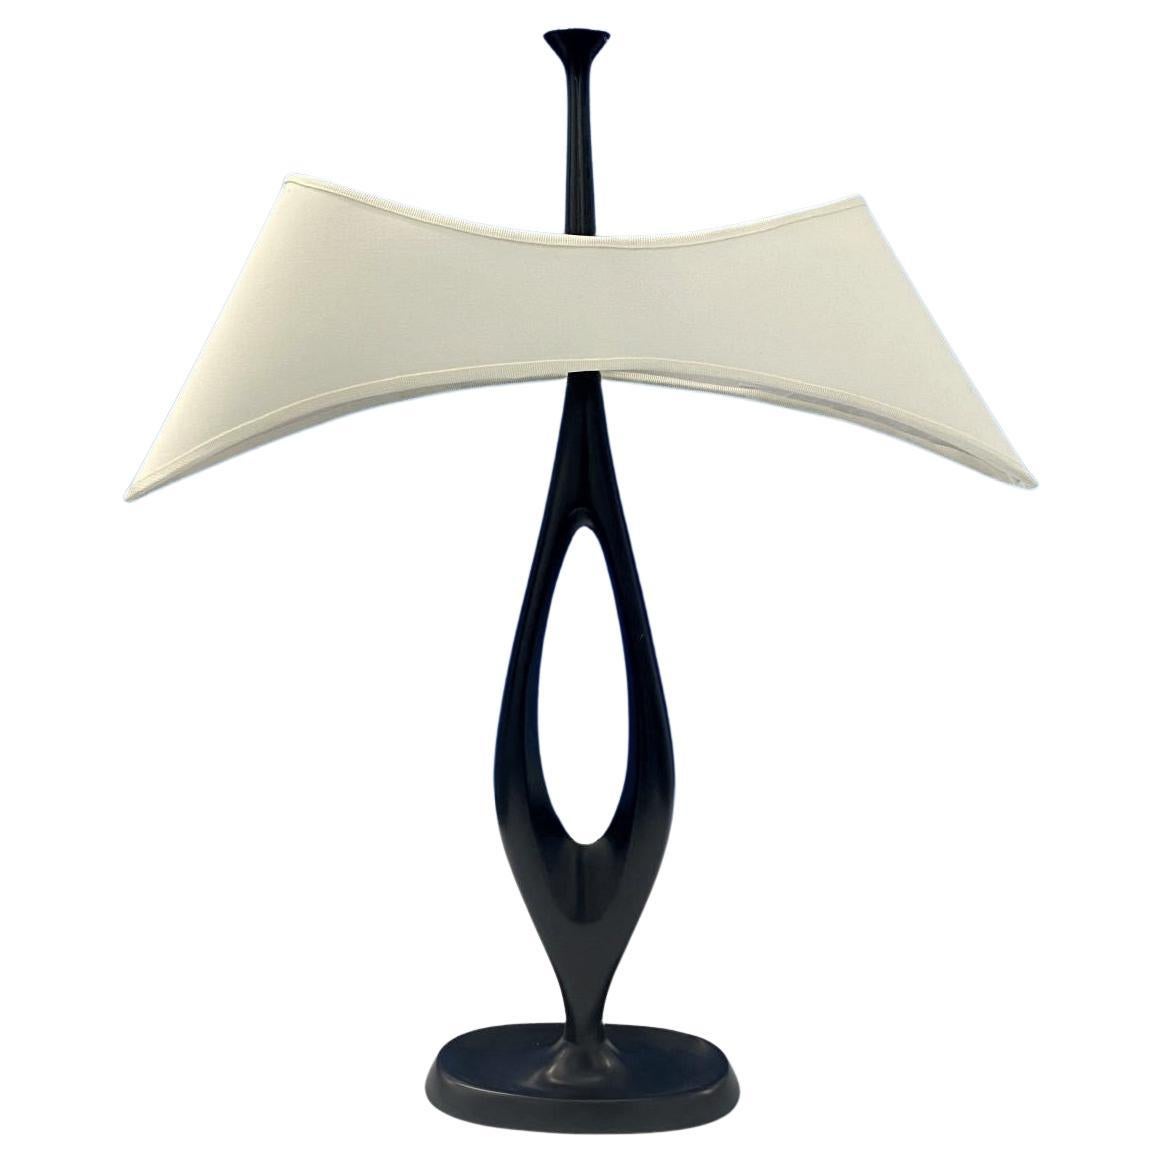 A rare table lamp designed by Max Ingrand and manufactured by Fontana Arte, 1955-1956, Milano, Italy. While running his own studio in Paris, Max Ingrand became in 1954 artistic director of Fontana Arte founded by Gio Ponti in 1932. The Italian